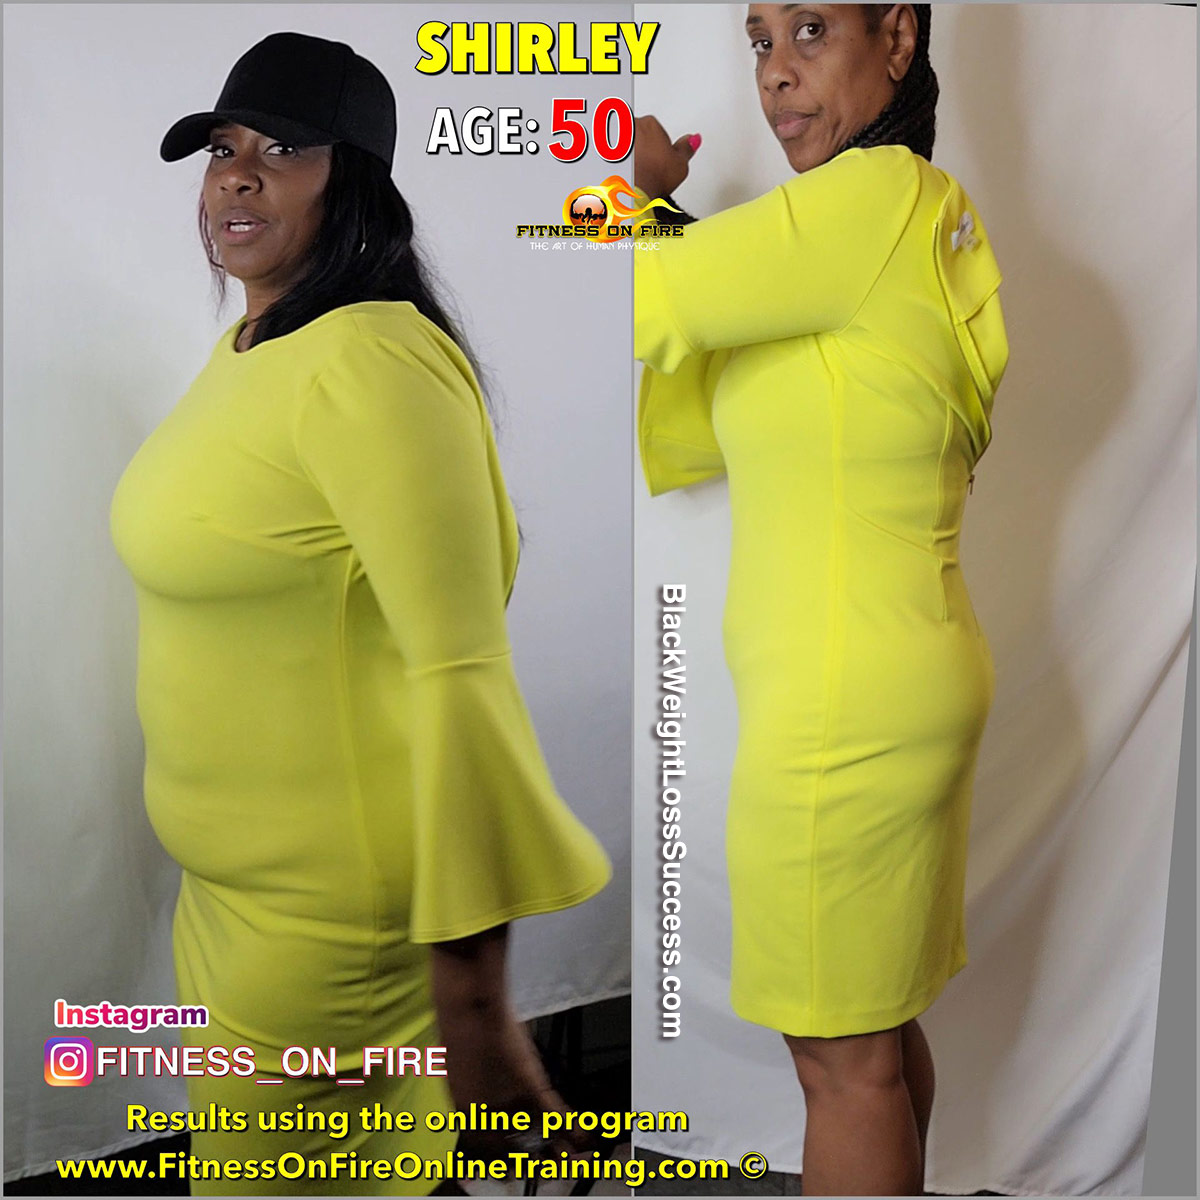 Shirley before and after weight loss